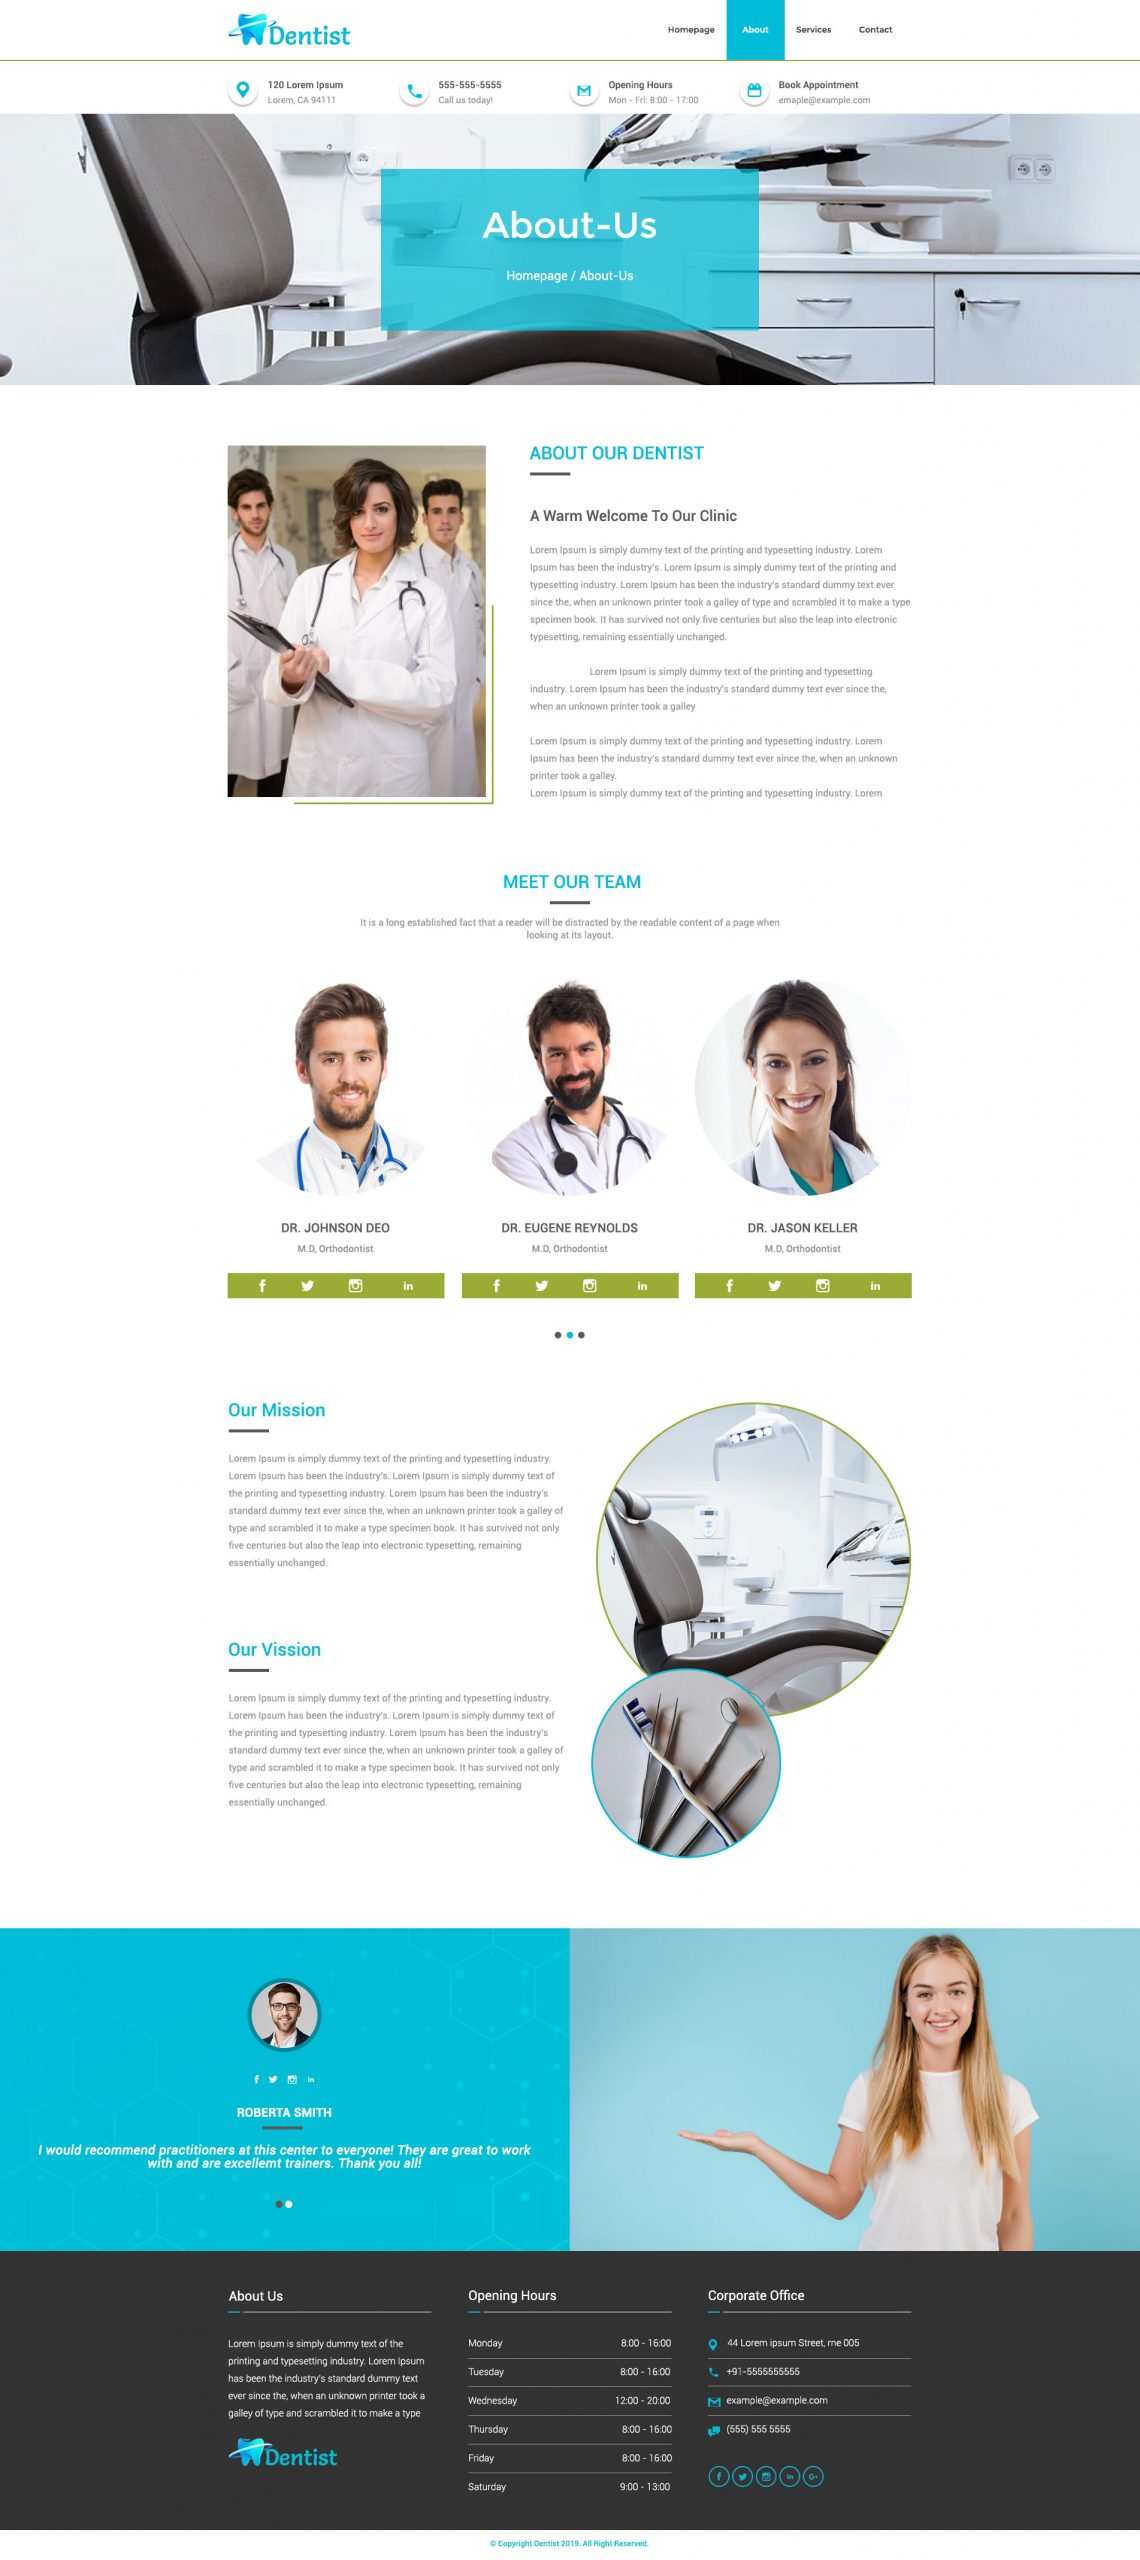 Dentist About Us Mockup